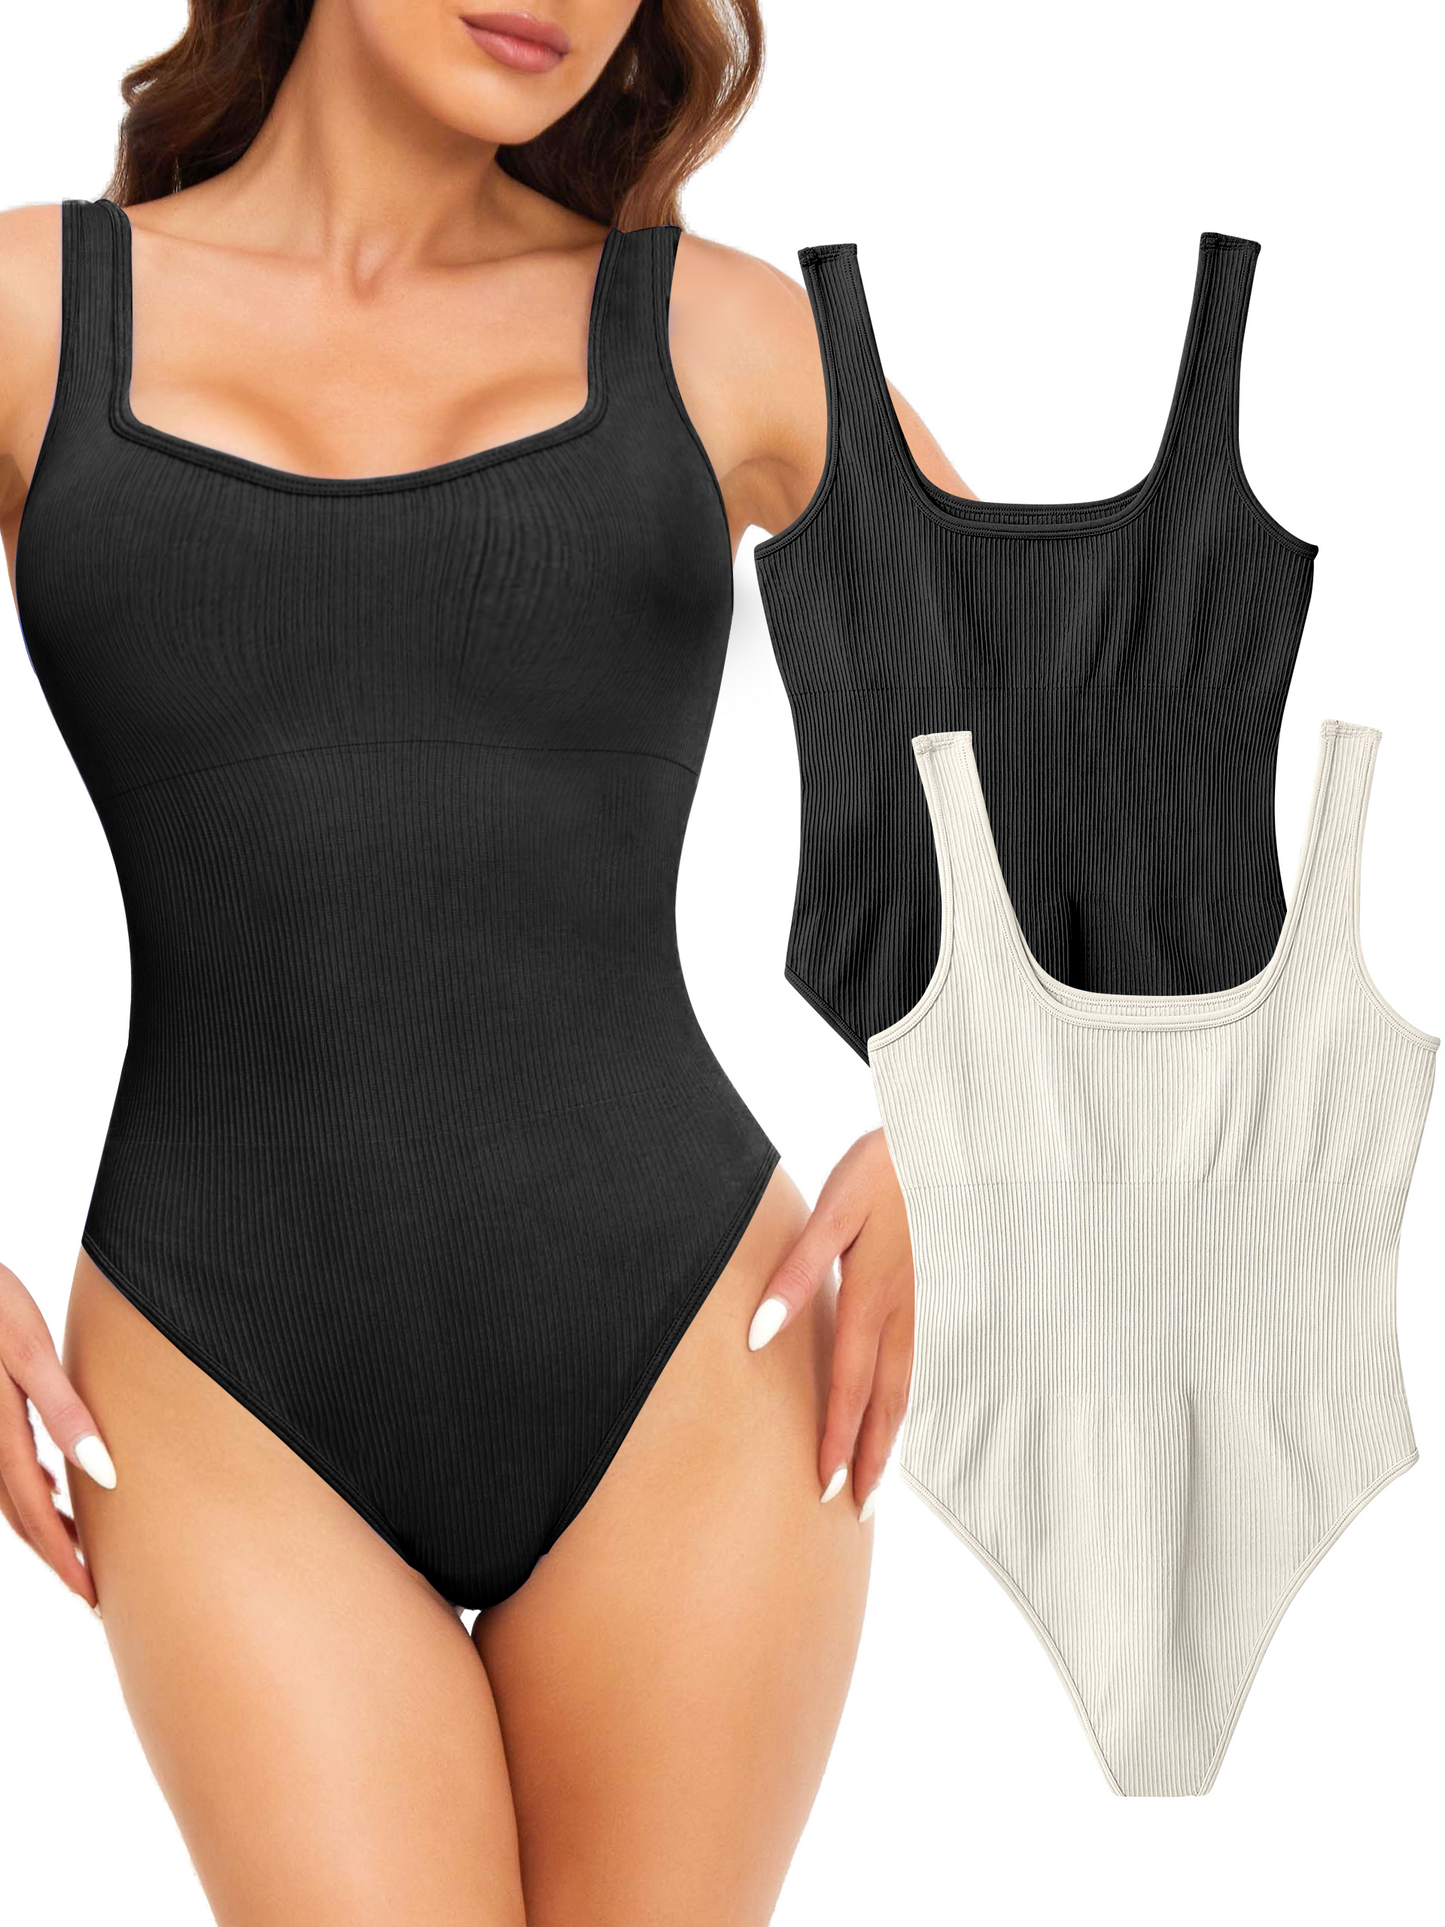 Seamless Waist Tummy Control Bodysuit With Ribbed Stella Seamless Plunge  Tank Square Neck Shapewear For Women, Slimming Jumpsuit From Lian07, $9.37